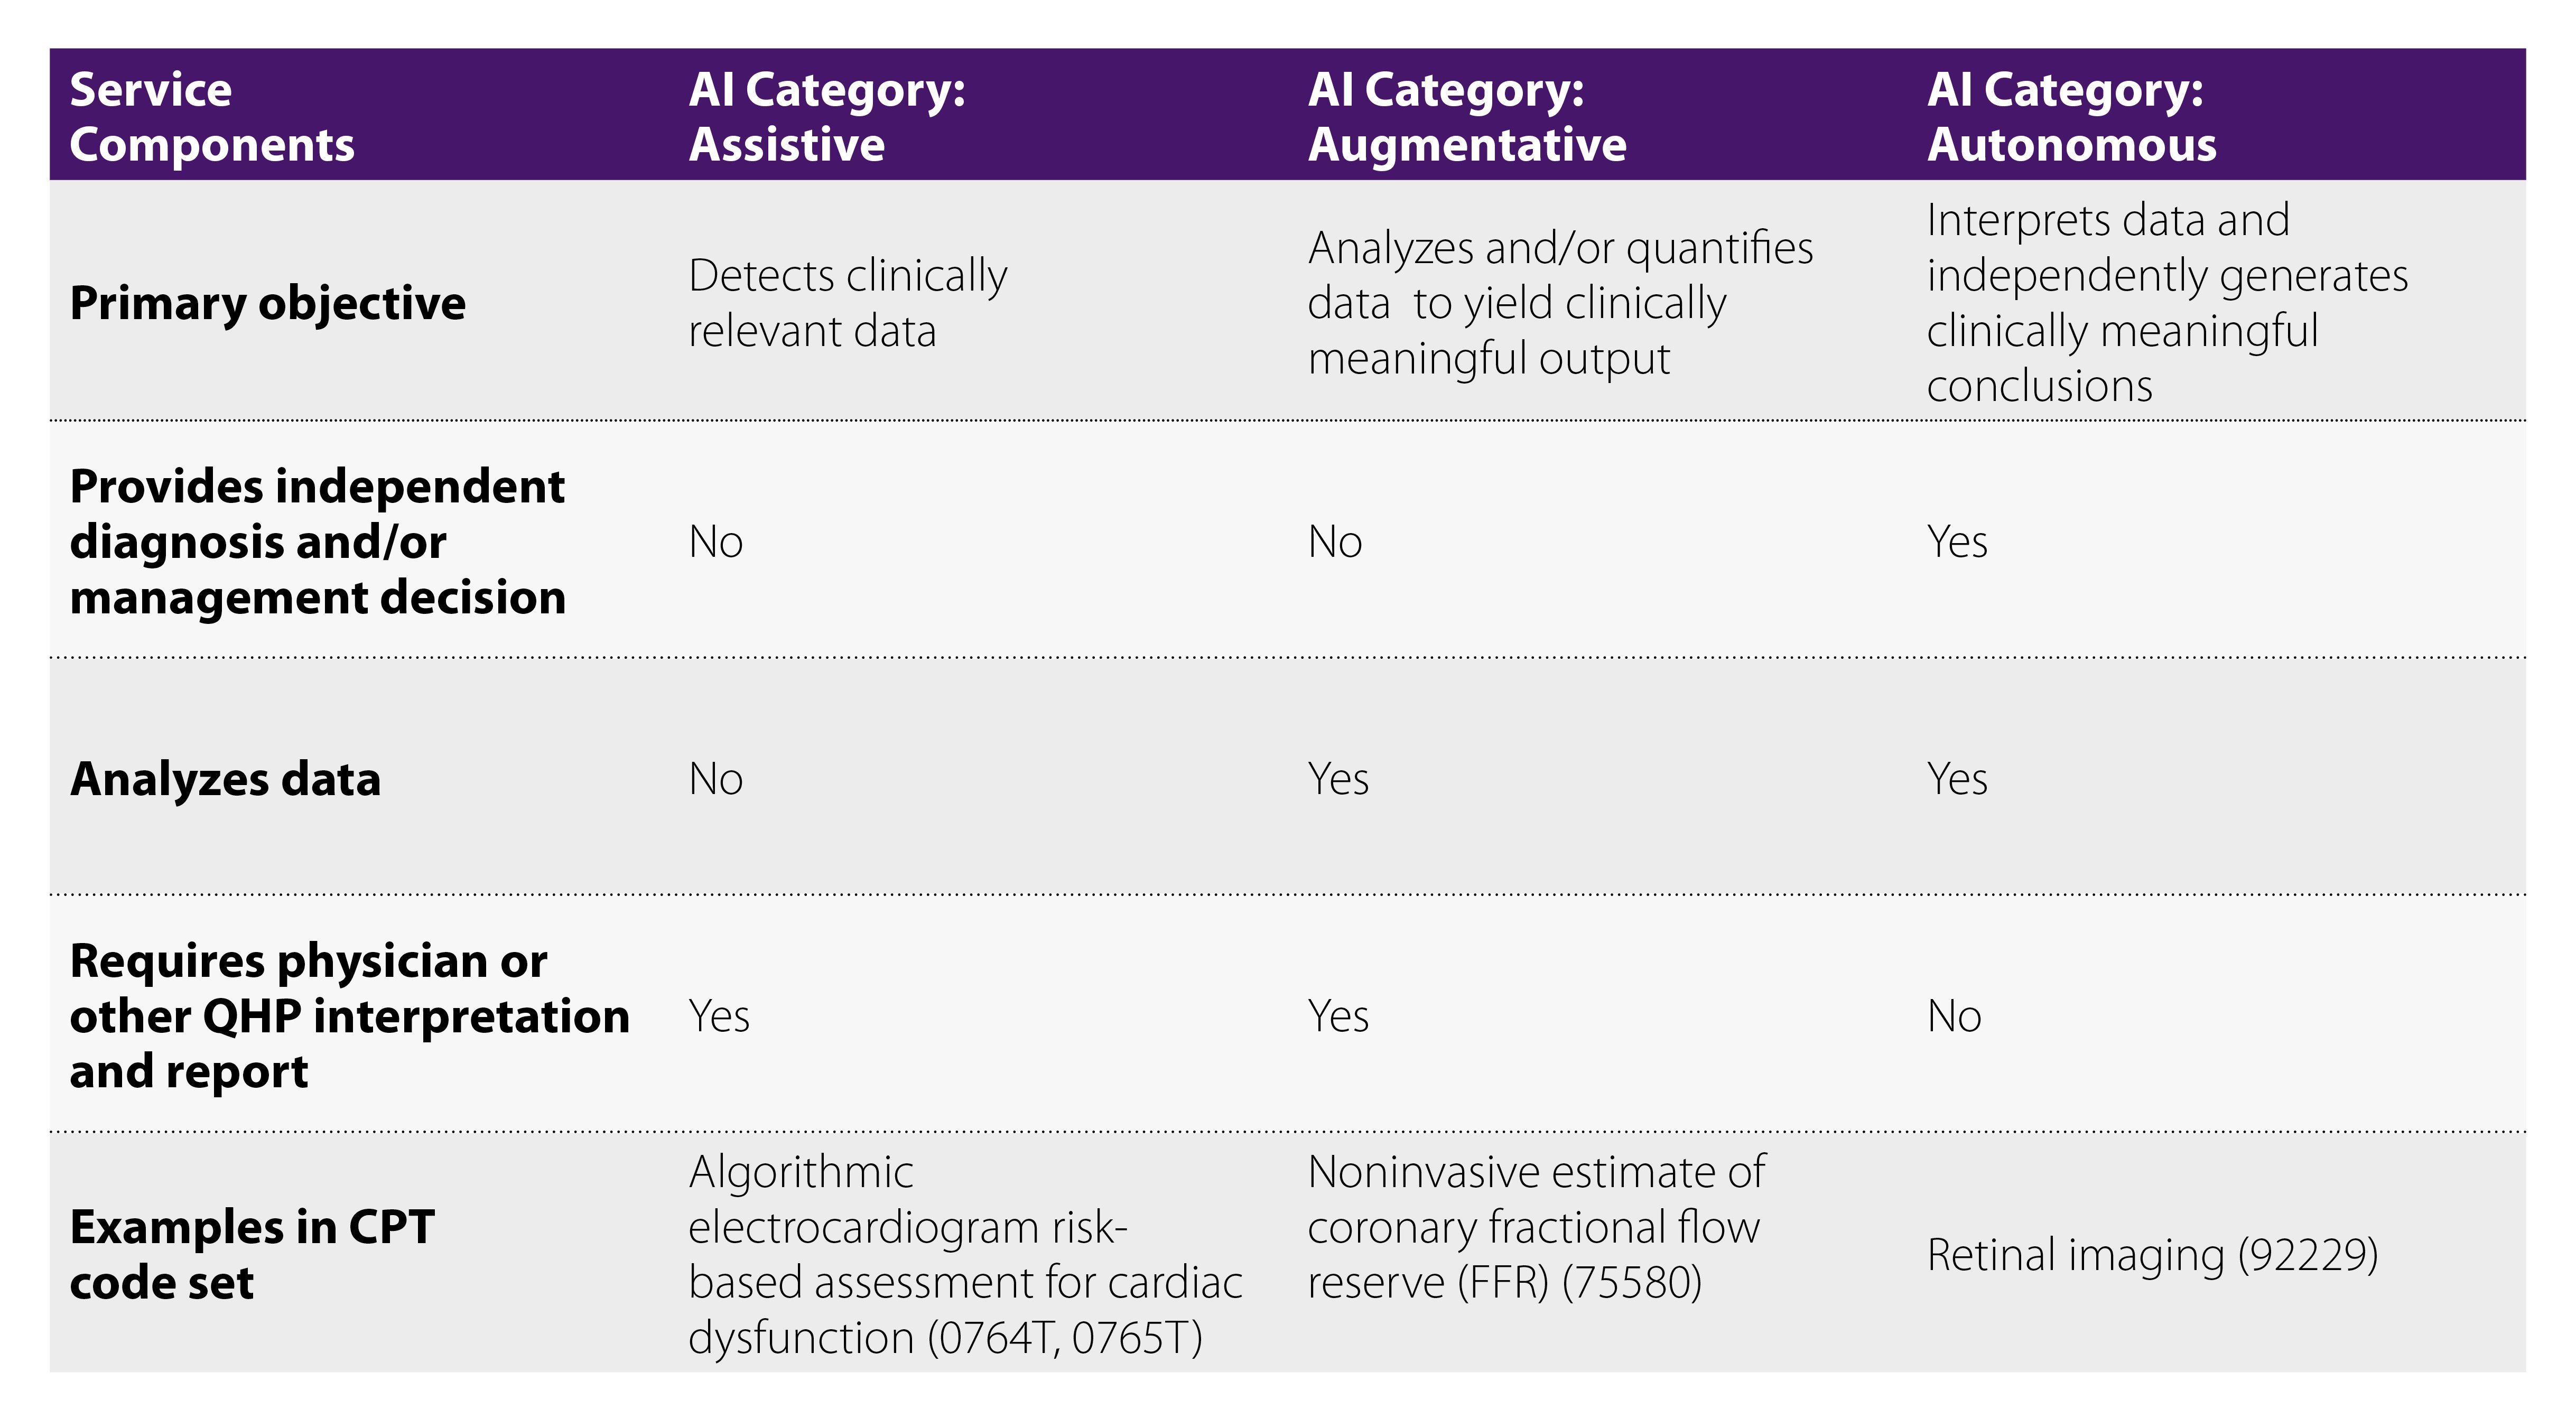 Review the CPT appendix S table for artificial intelligence taxonomy for medical services and procedures.